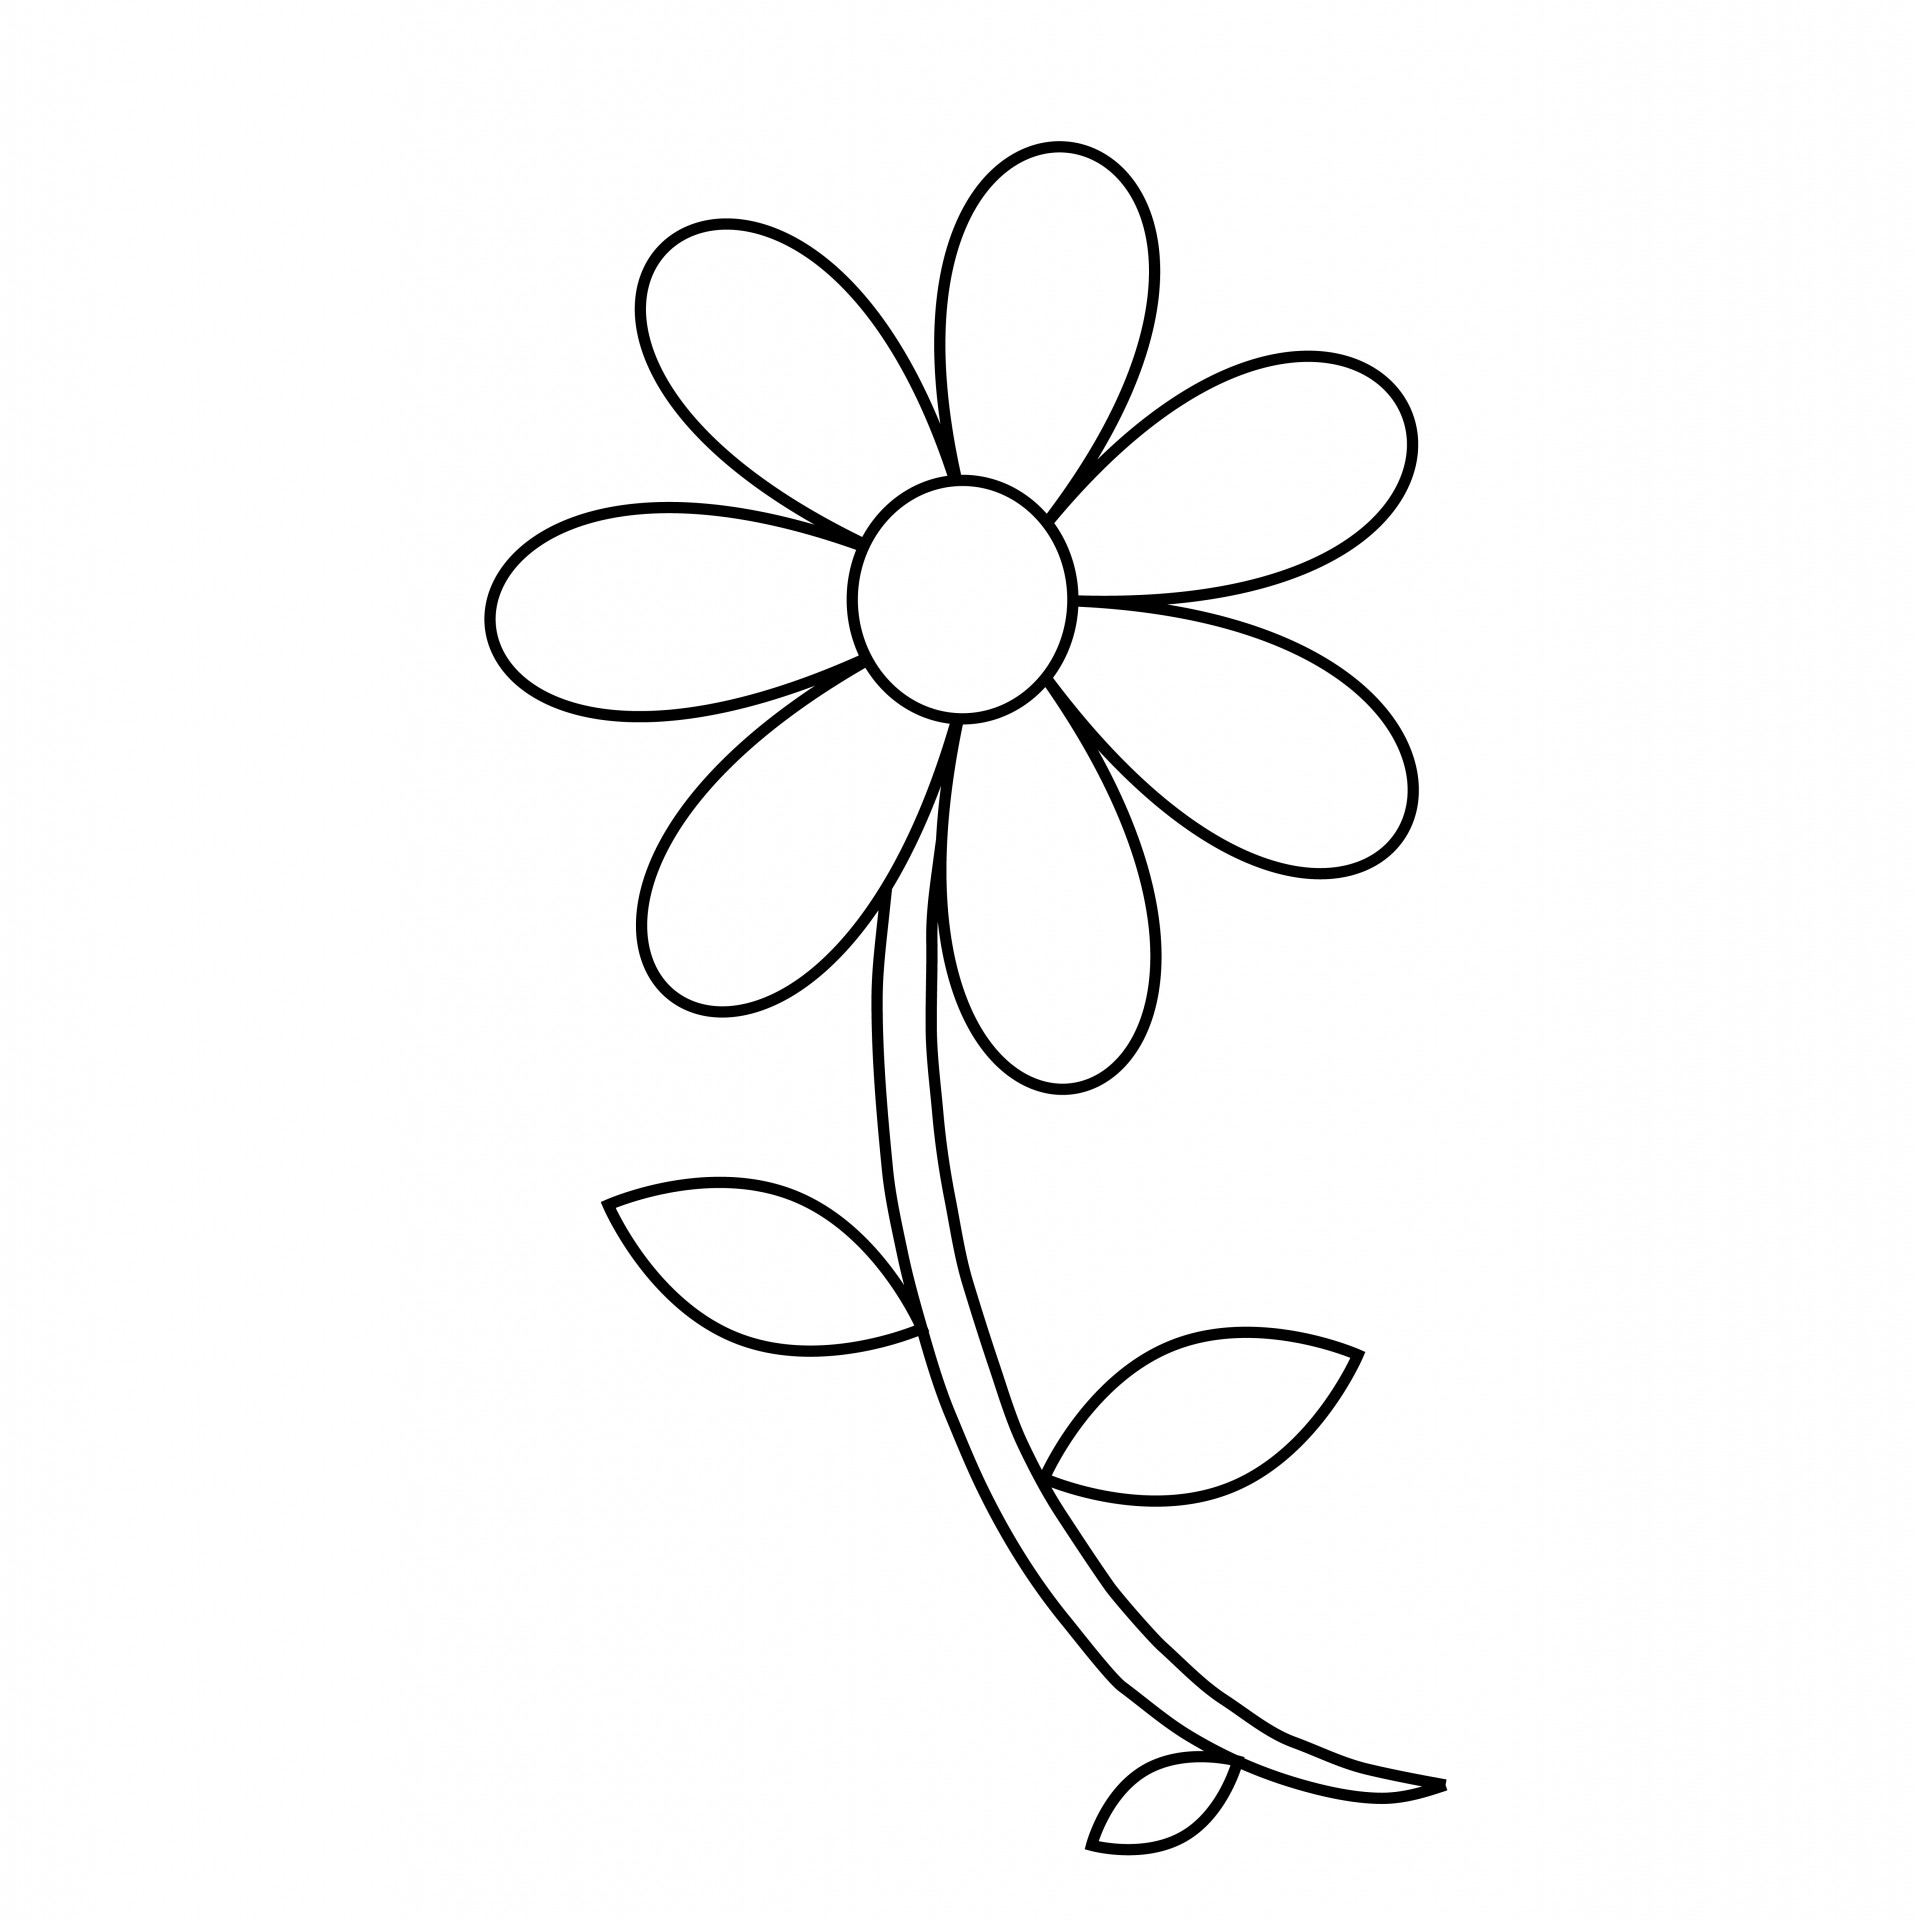 flower-outline-coloring-page.jpg